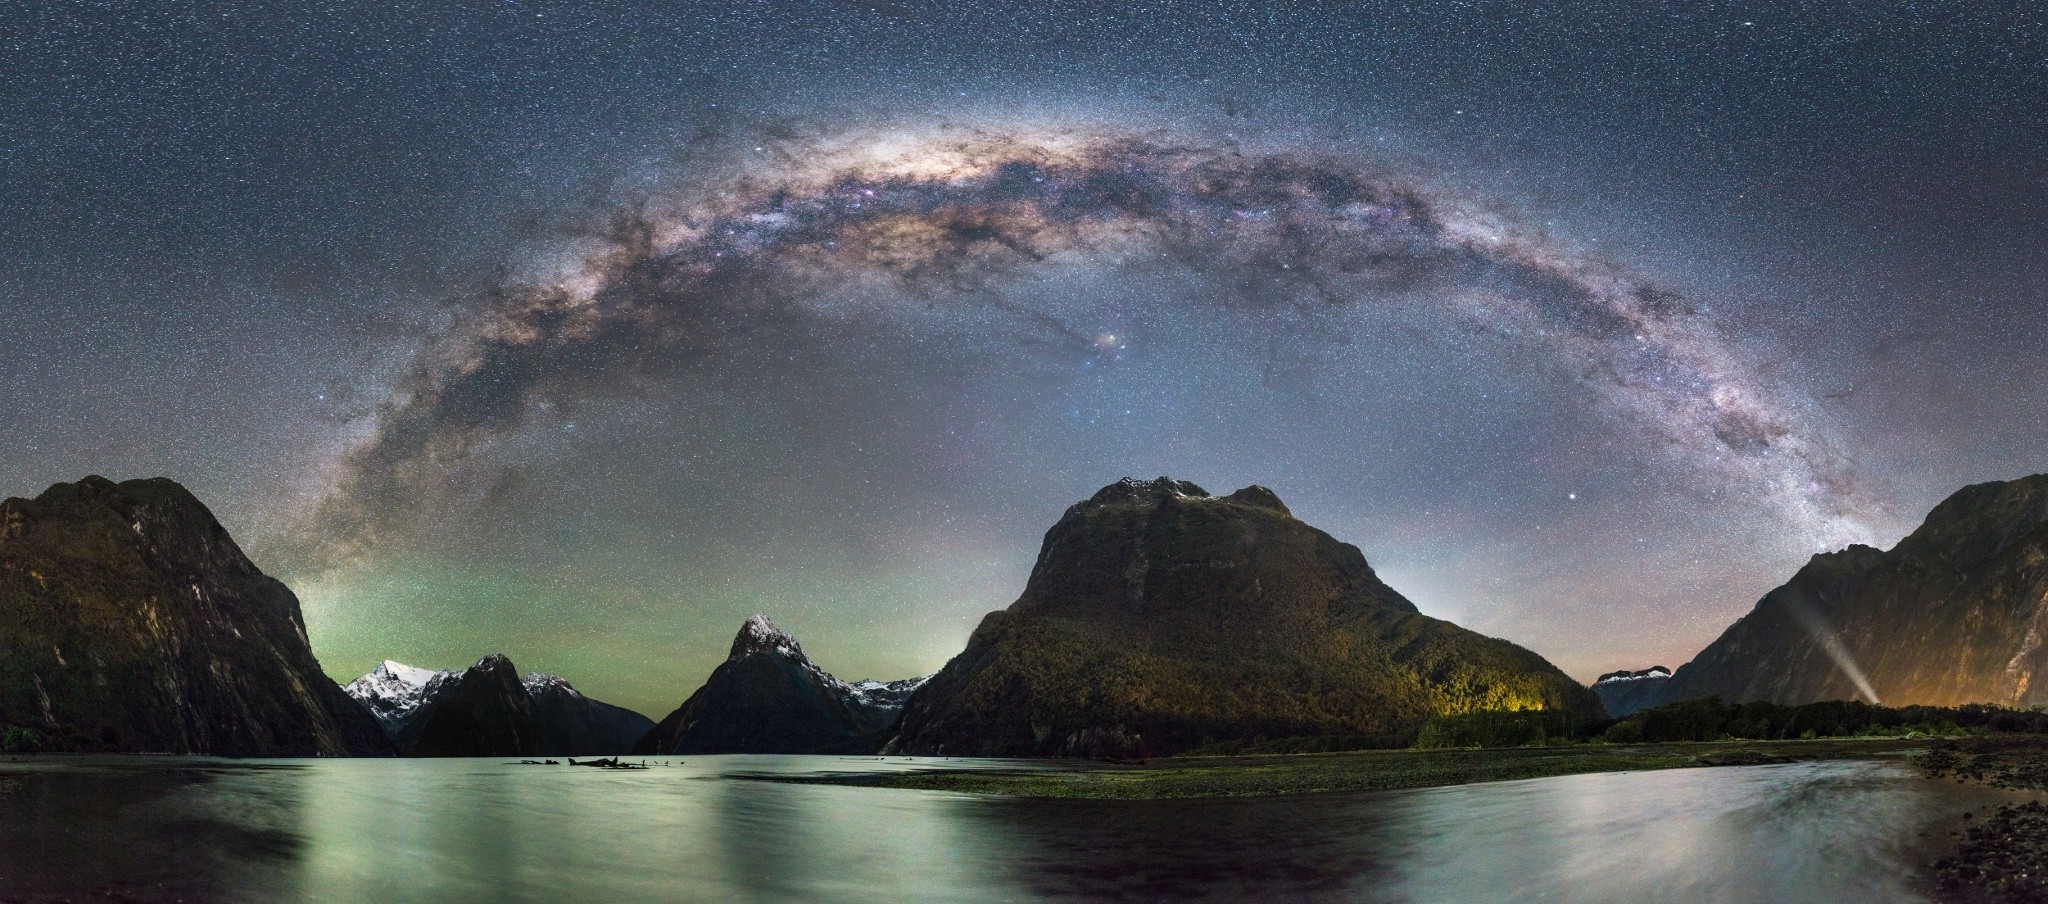 nature, Landscape, Panoramas, Mountain, Milky Way, Galaxy, Starry Night, Snowy Peak, Fjord, Milford Sound, New Zealand, Long Exposure Wallpaper